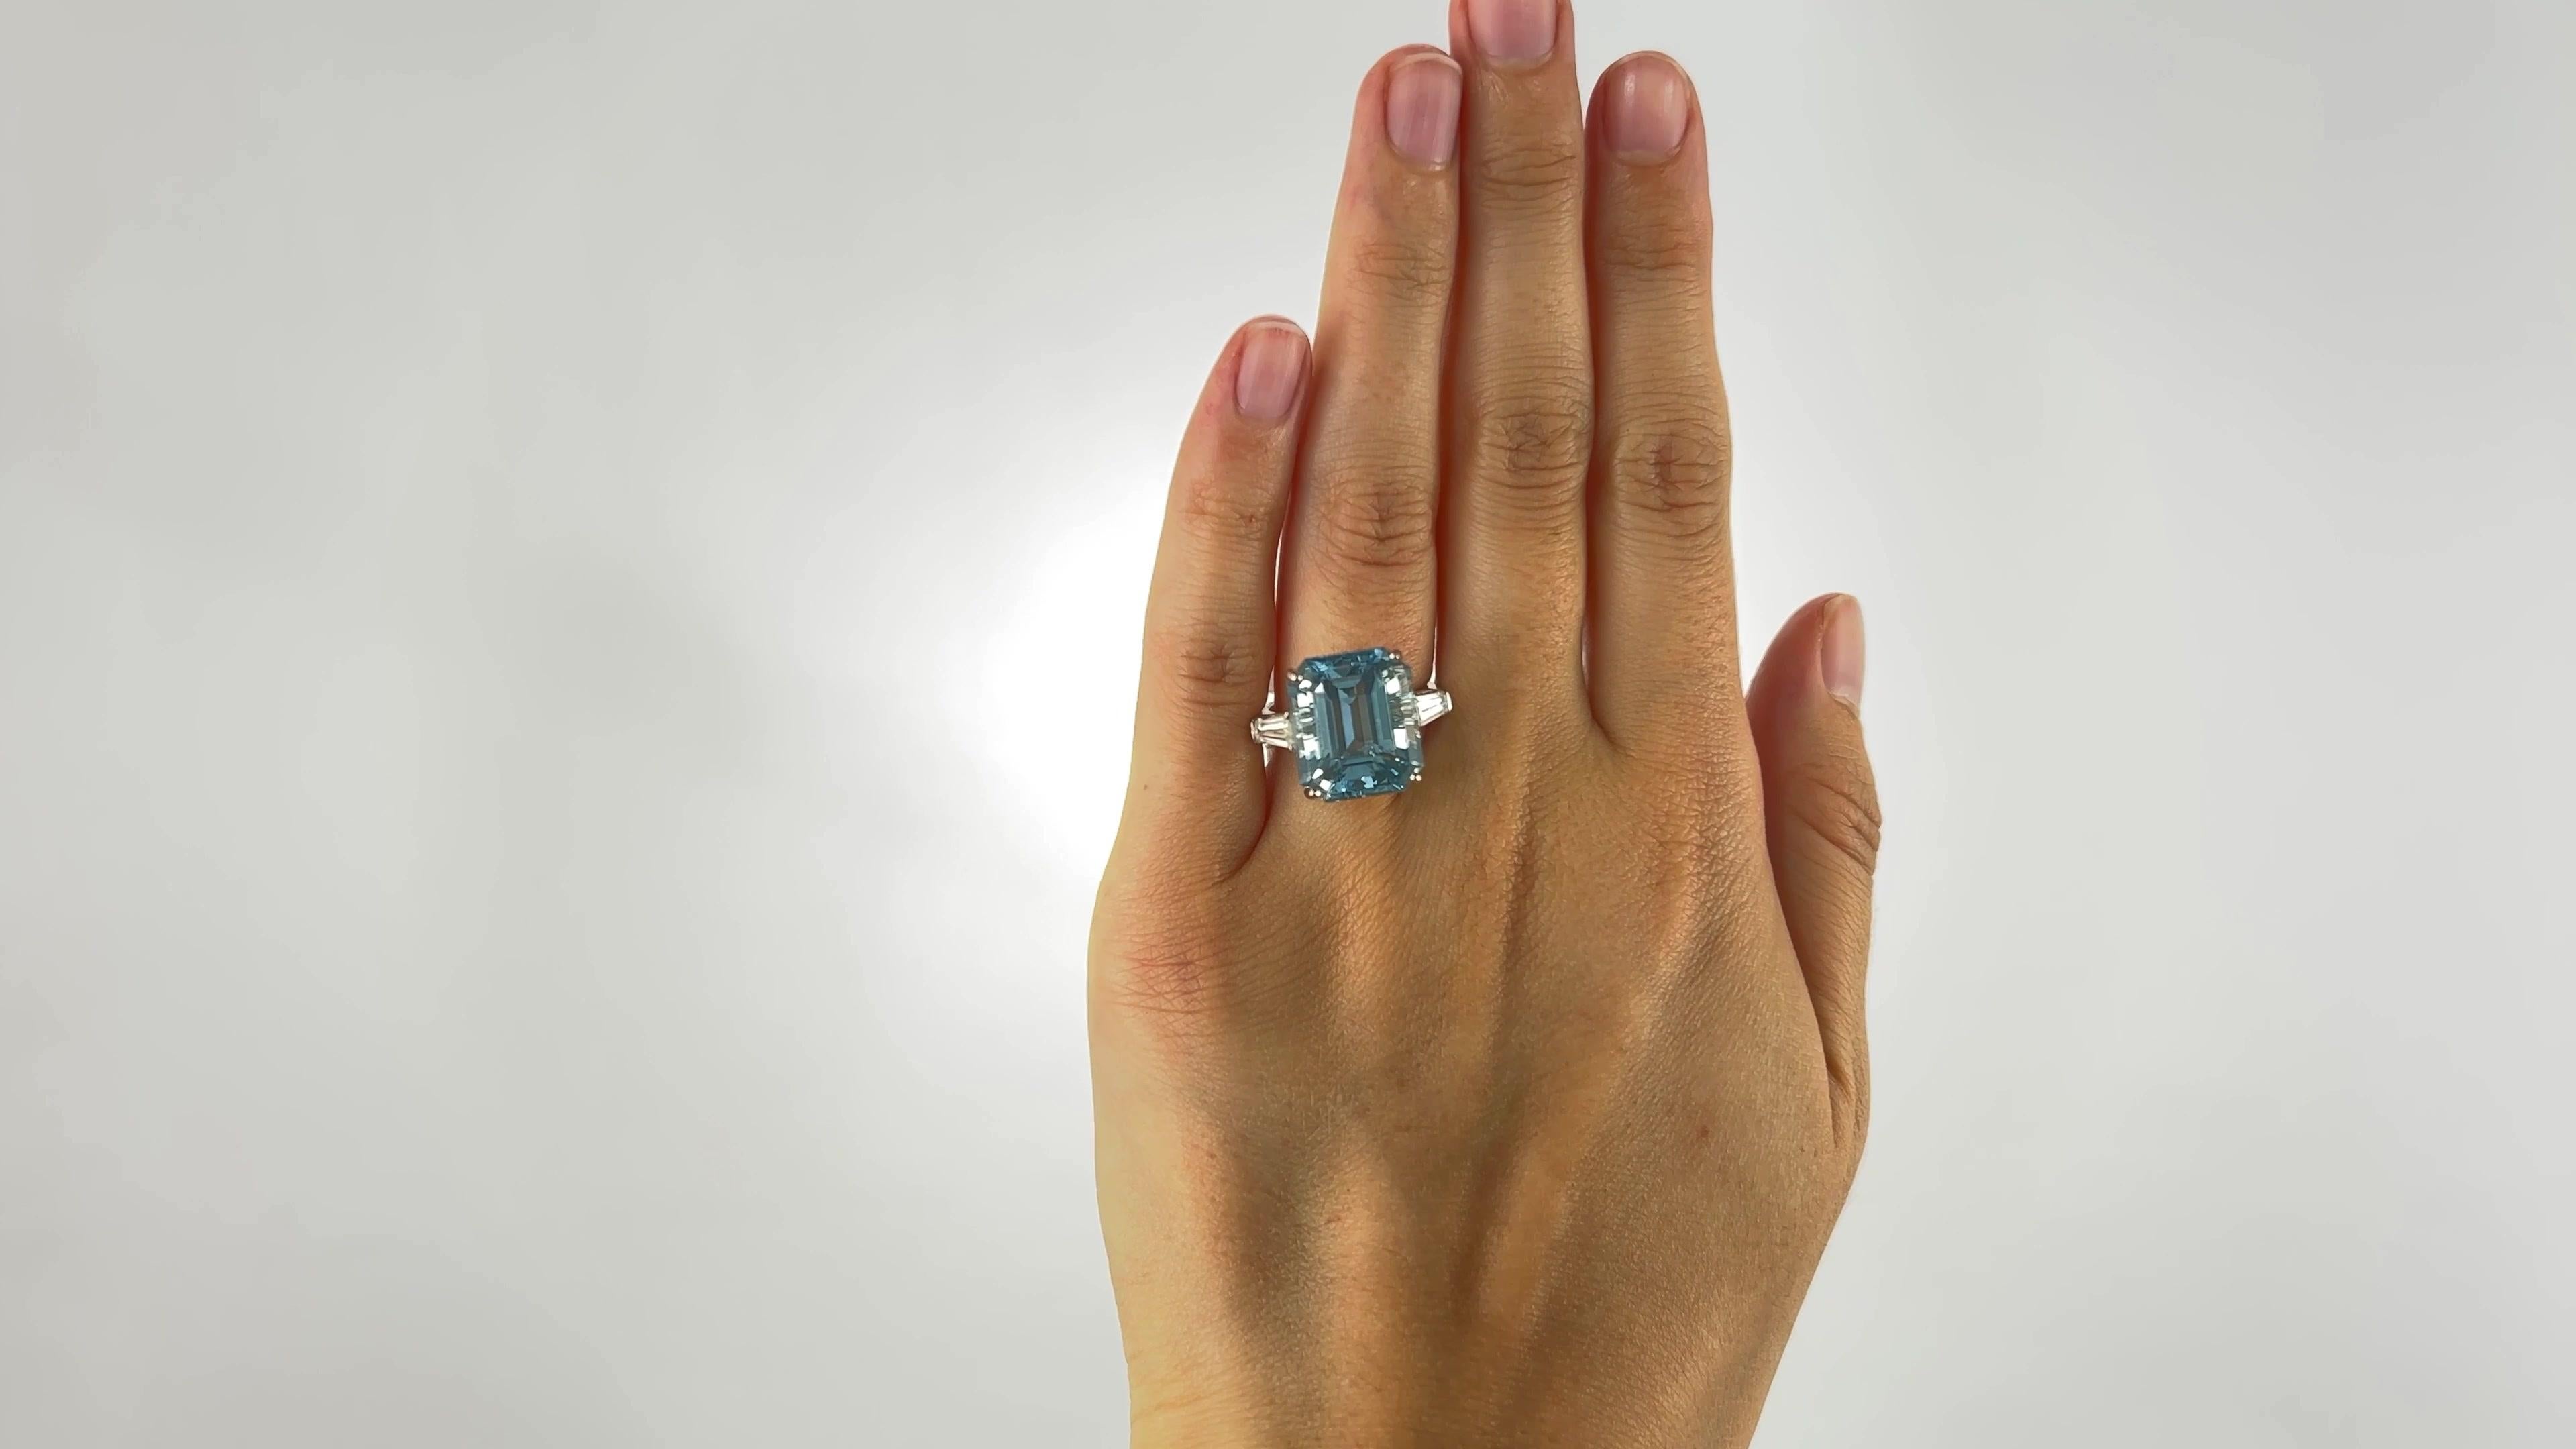 One Retro 10.58 Carats Aquamarine Diamond Platinum Ring. Featuring one rectangle step cut aquamarine of 10.58 carats. Accented by two tapered baguette cut diamonds with a total weight of approximately 0.60 carat, graded F color, VS clarity. Crafted